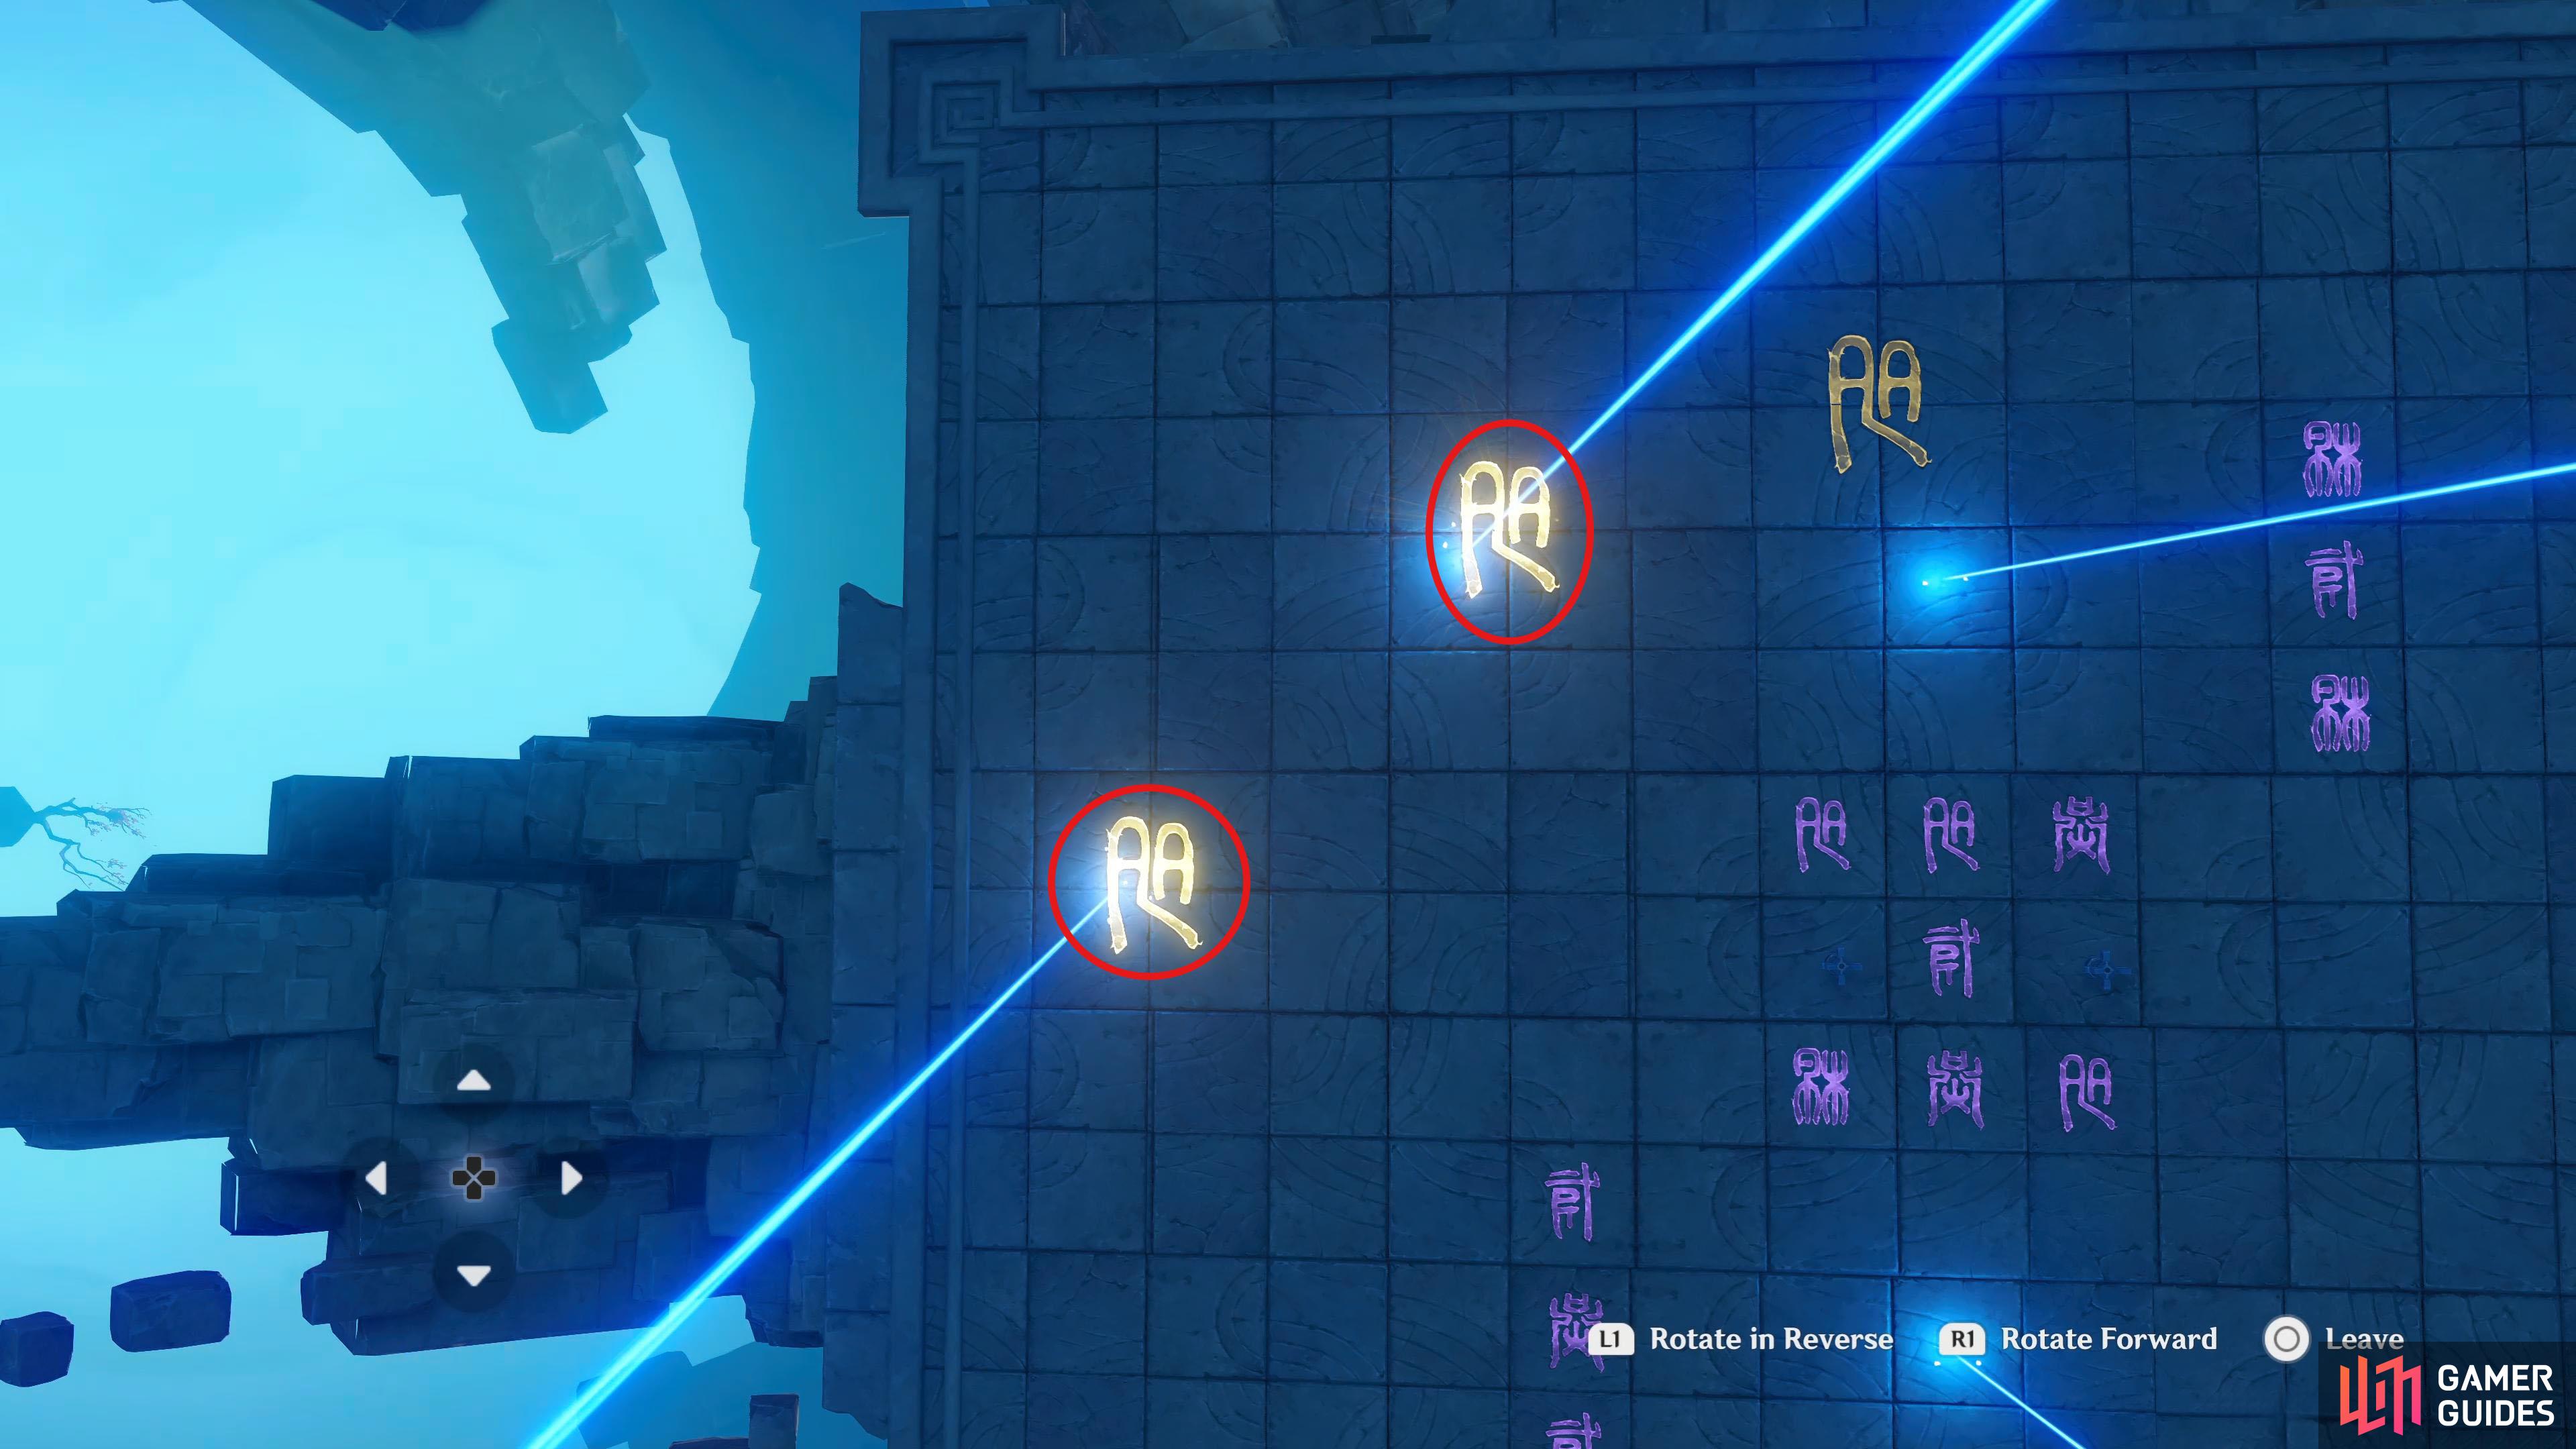 The Lightshape with the smaller game between the beams needs to activate the runes in the northwest corner